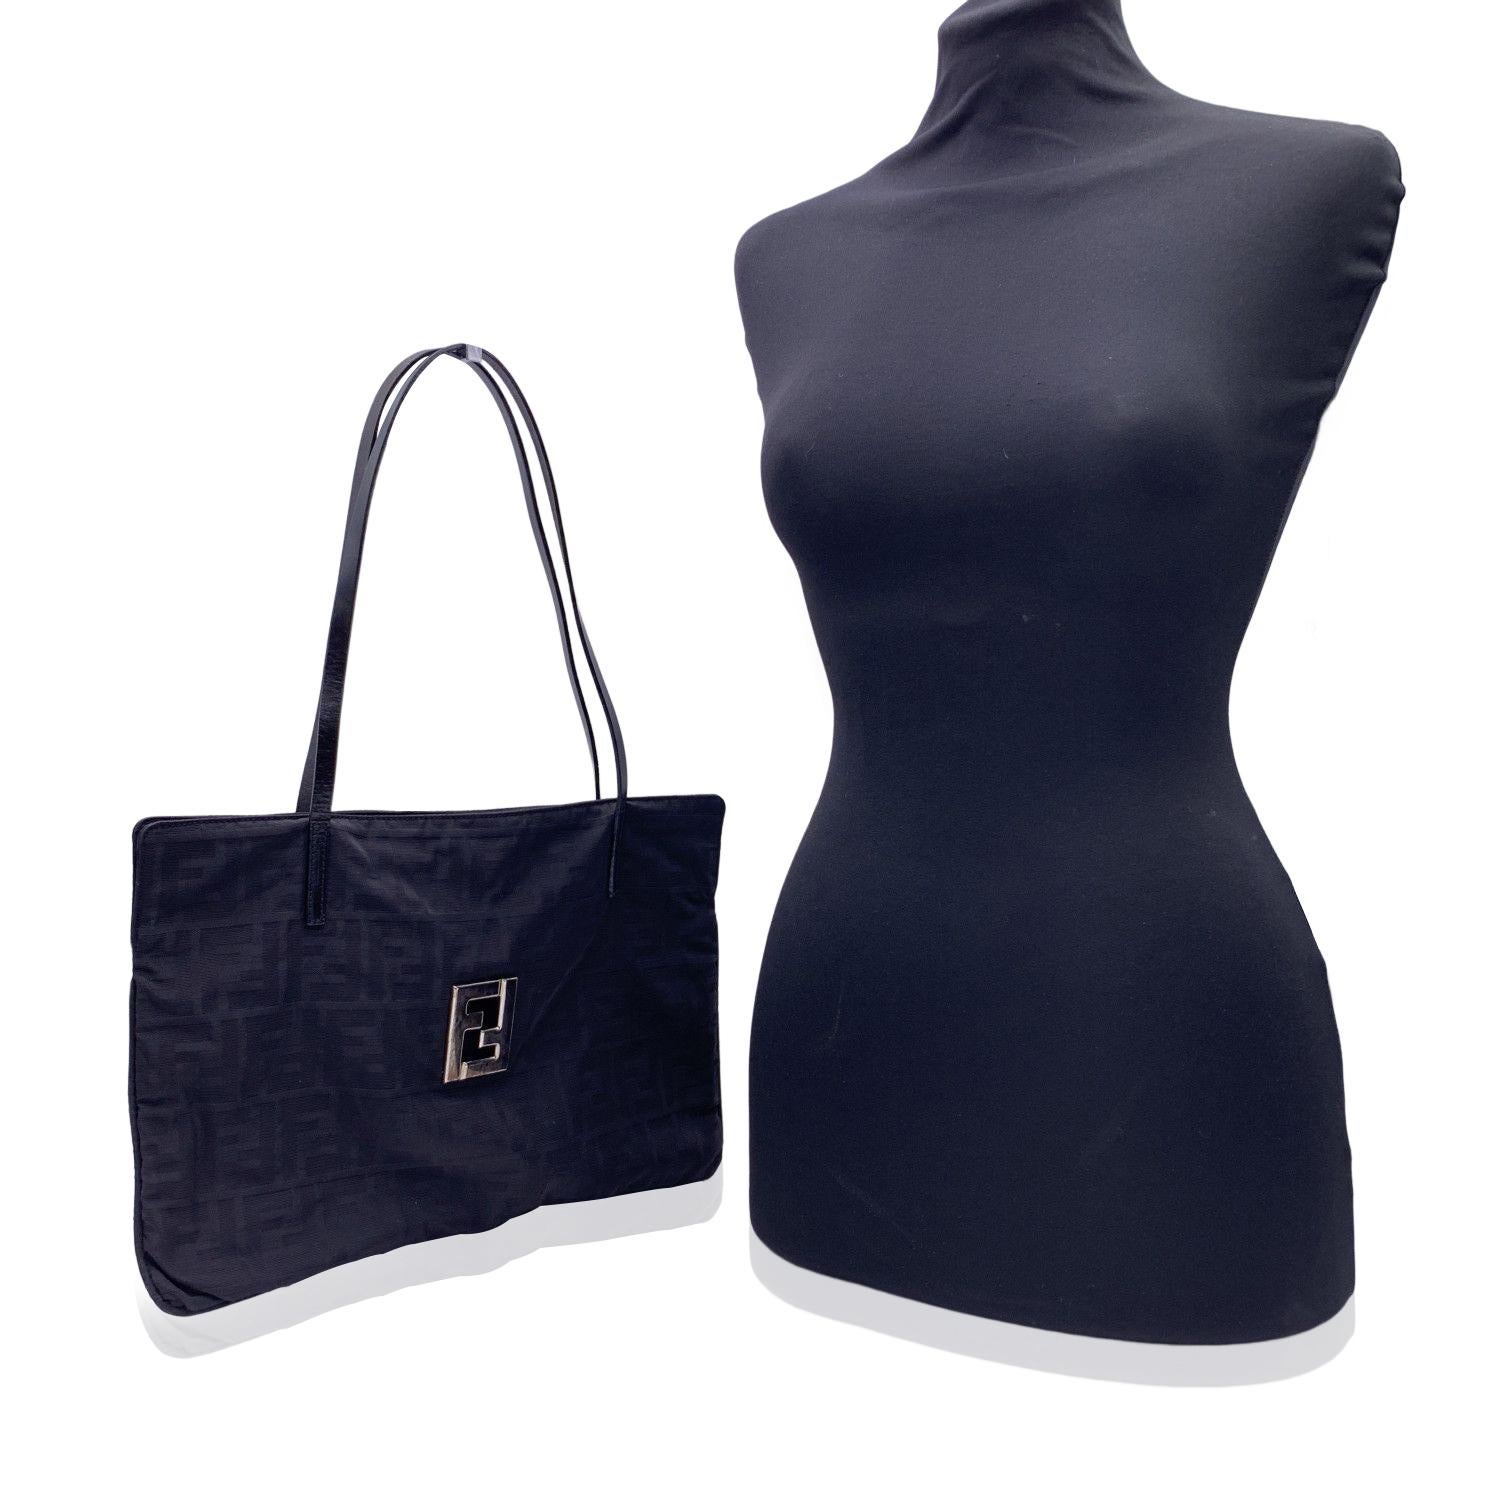 Fendi tote bag crafted in black monogram canvas with black genuine leather shoulder straps. Cut-out FF - FENDI logo on the front. Magnetic button closure on top. Black canvas lining. 1 side zip pocket inside. 'Fendi - Made in Italy' tag inside.